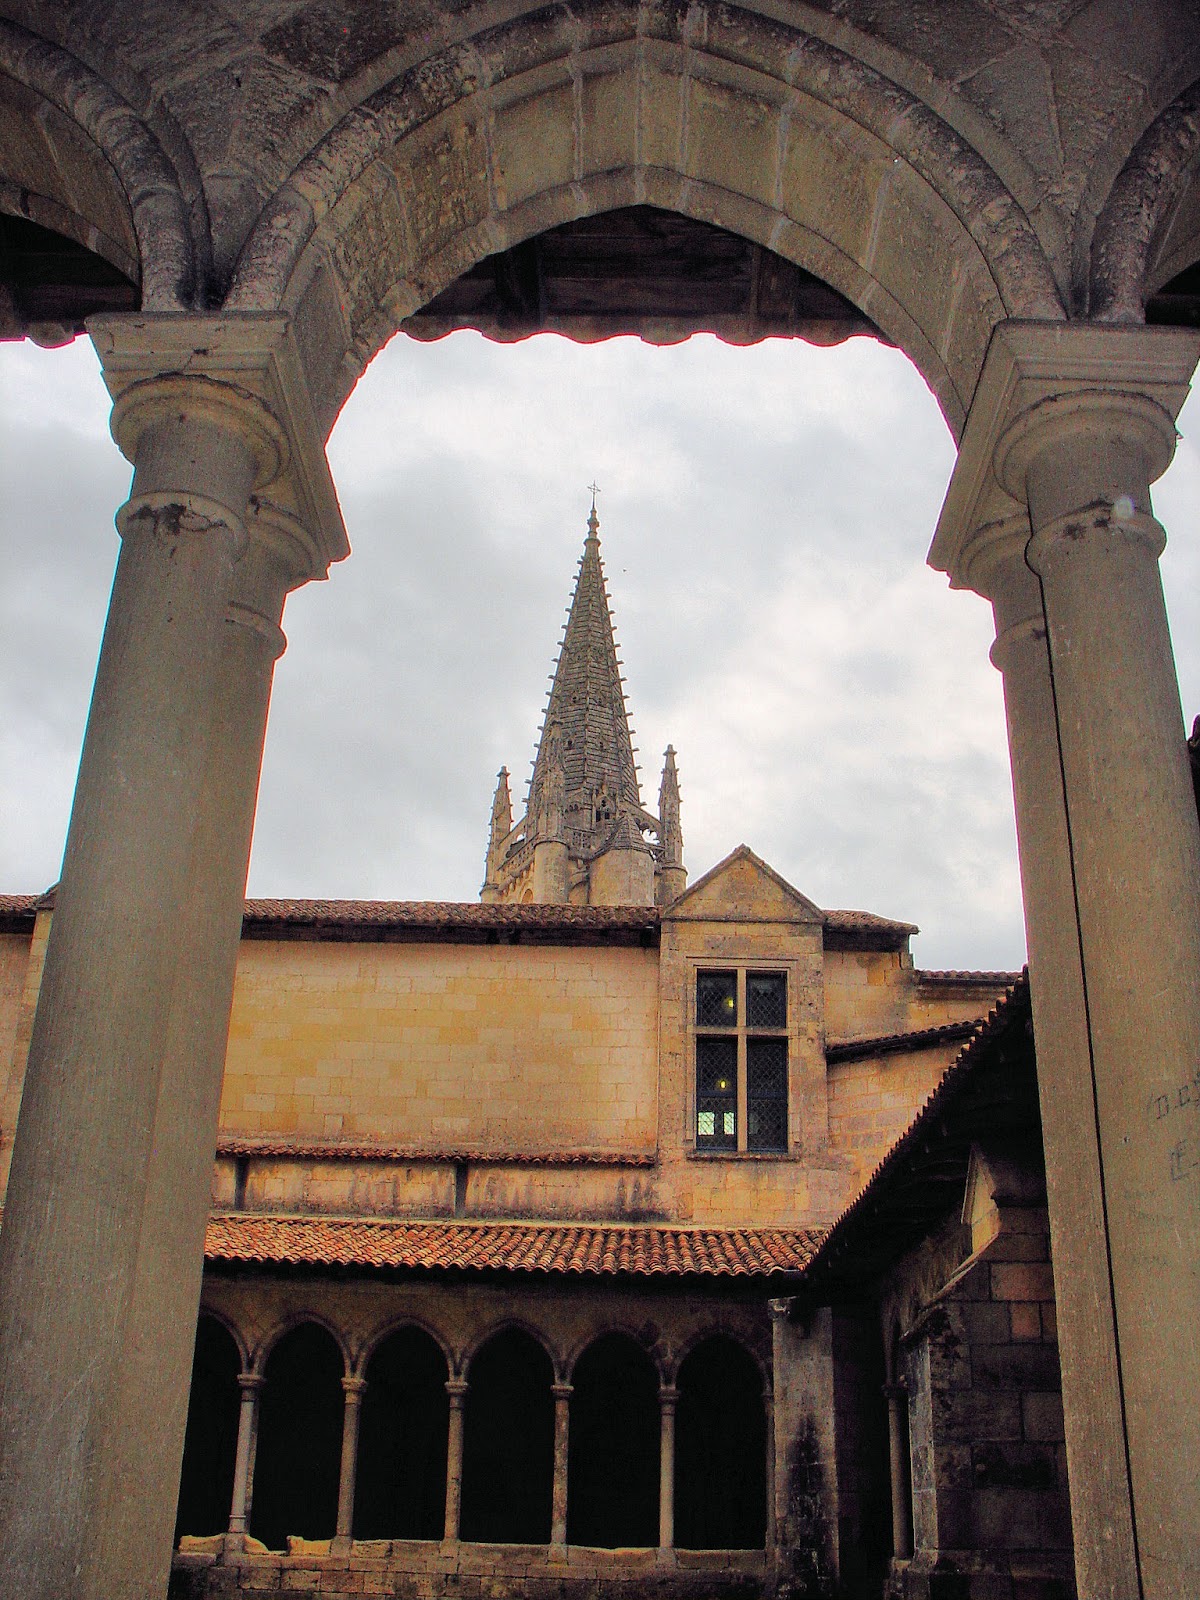 The Monolithic Church tower as seen from the Collegiate Cloisters.